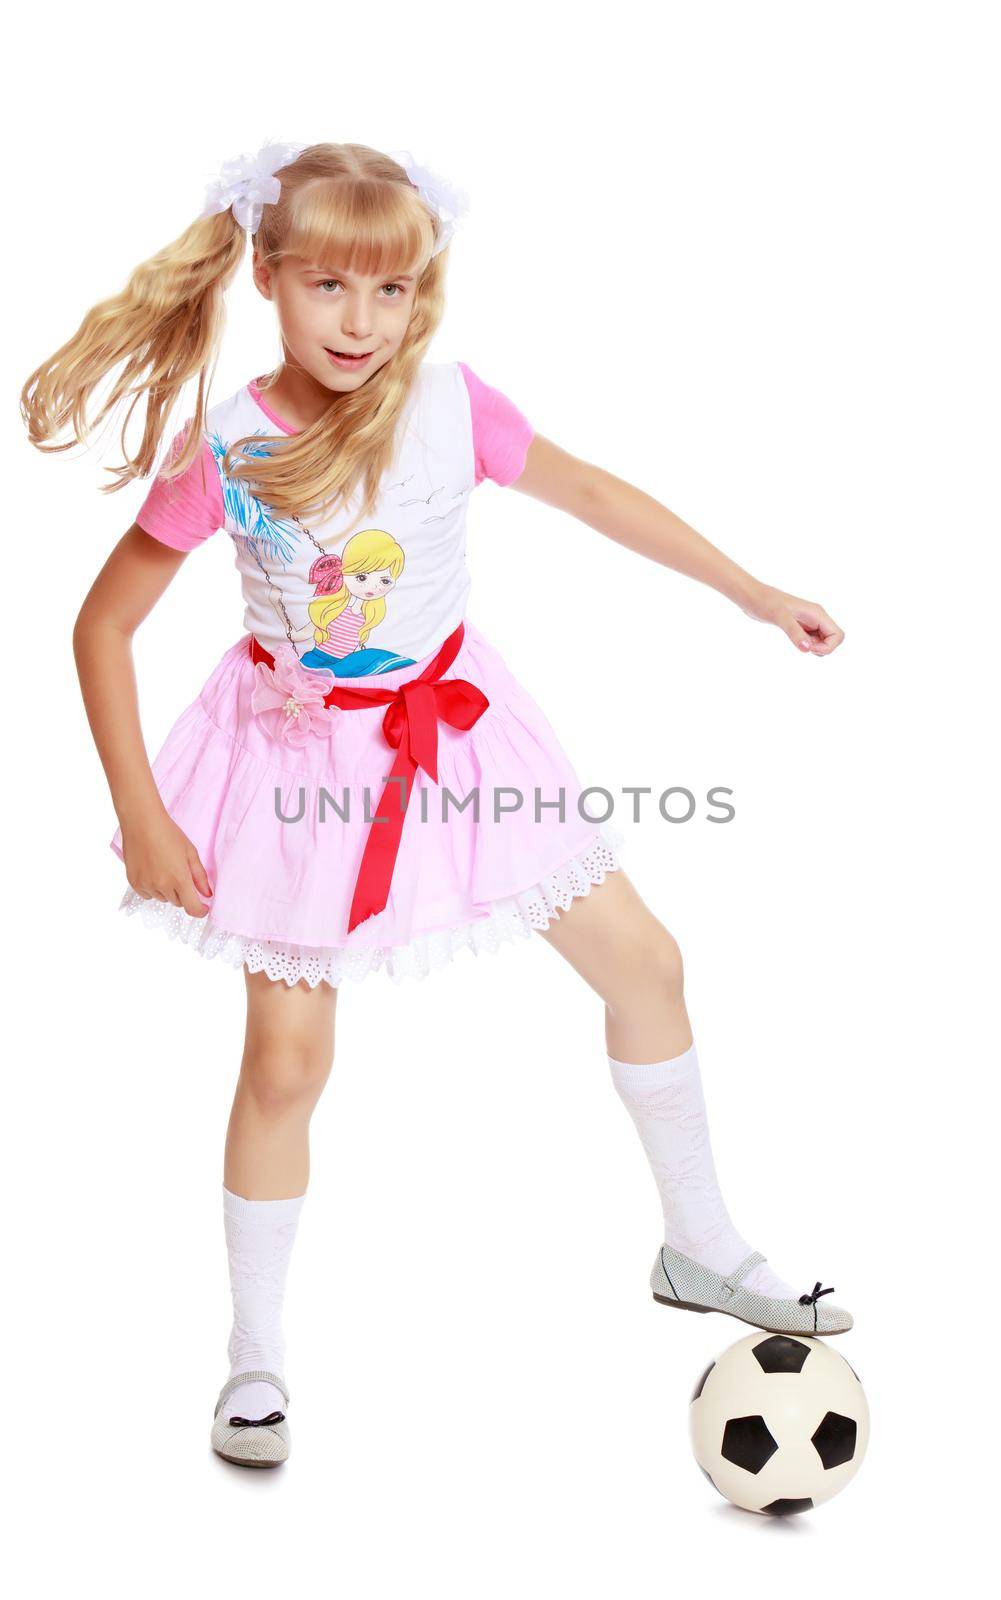 Enthusiastic little blonde girl in a short pink skirt, plays football-Isolated on white background